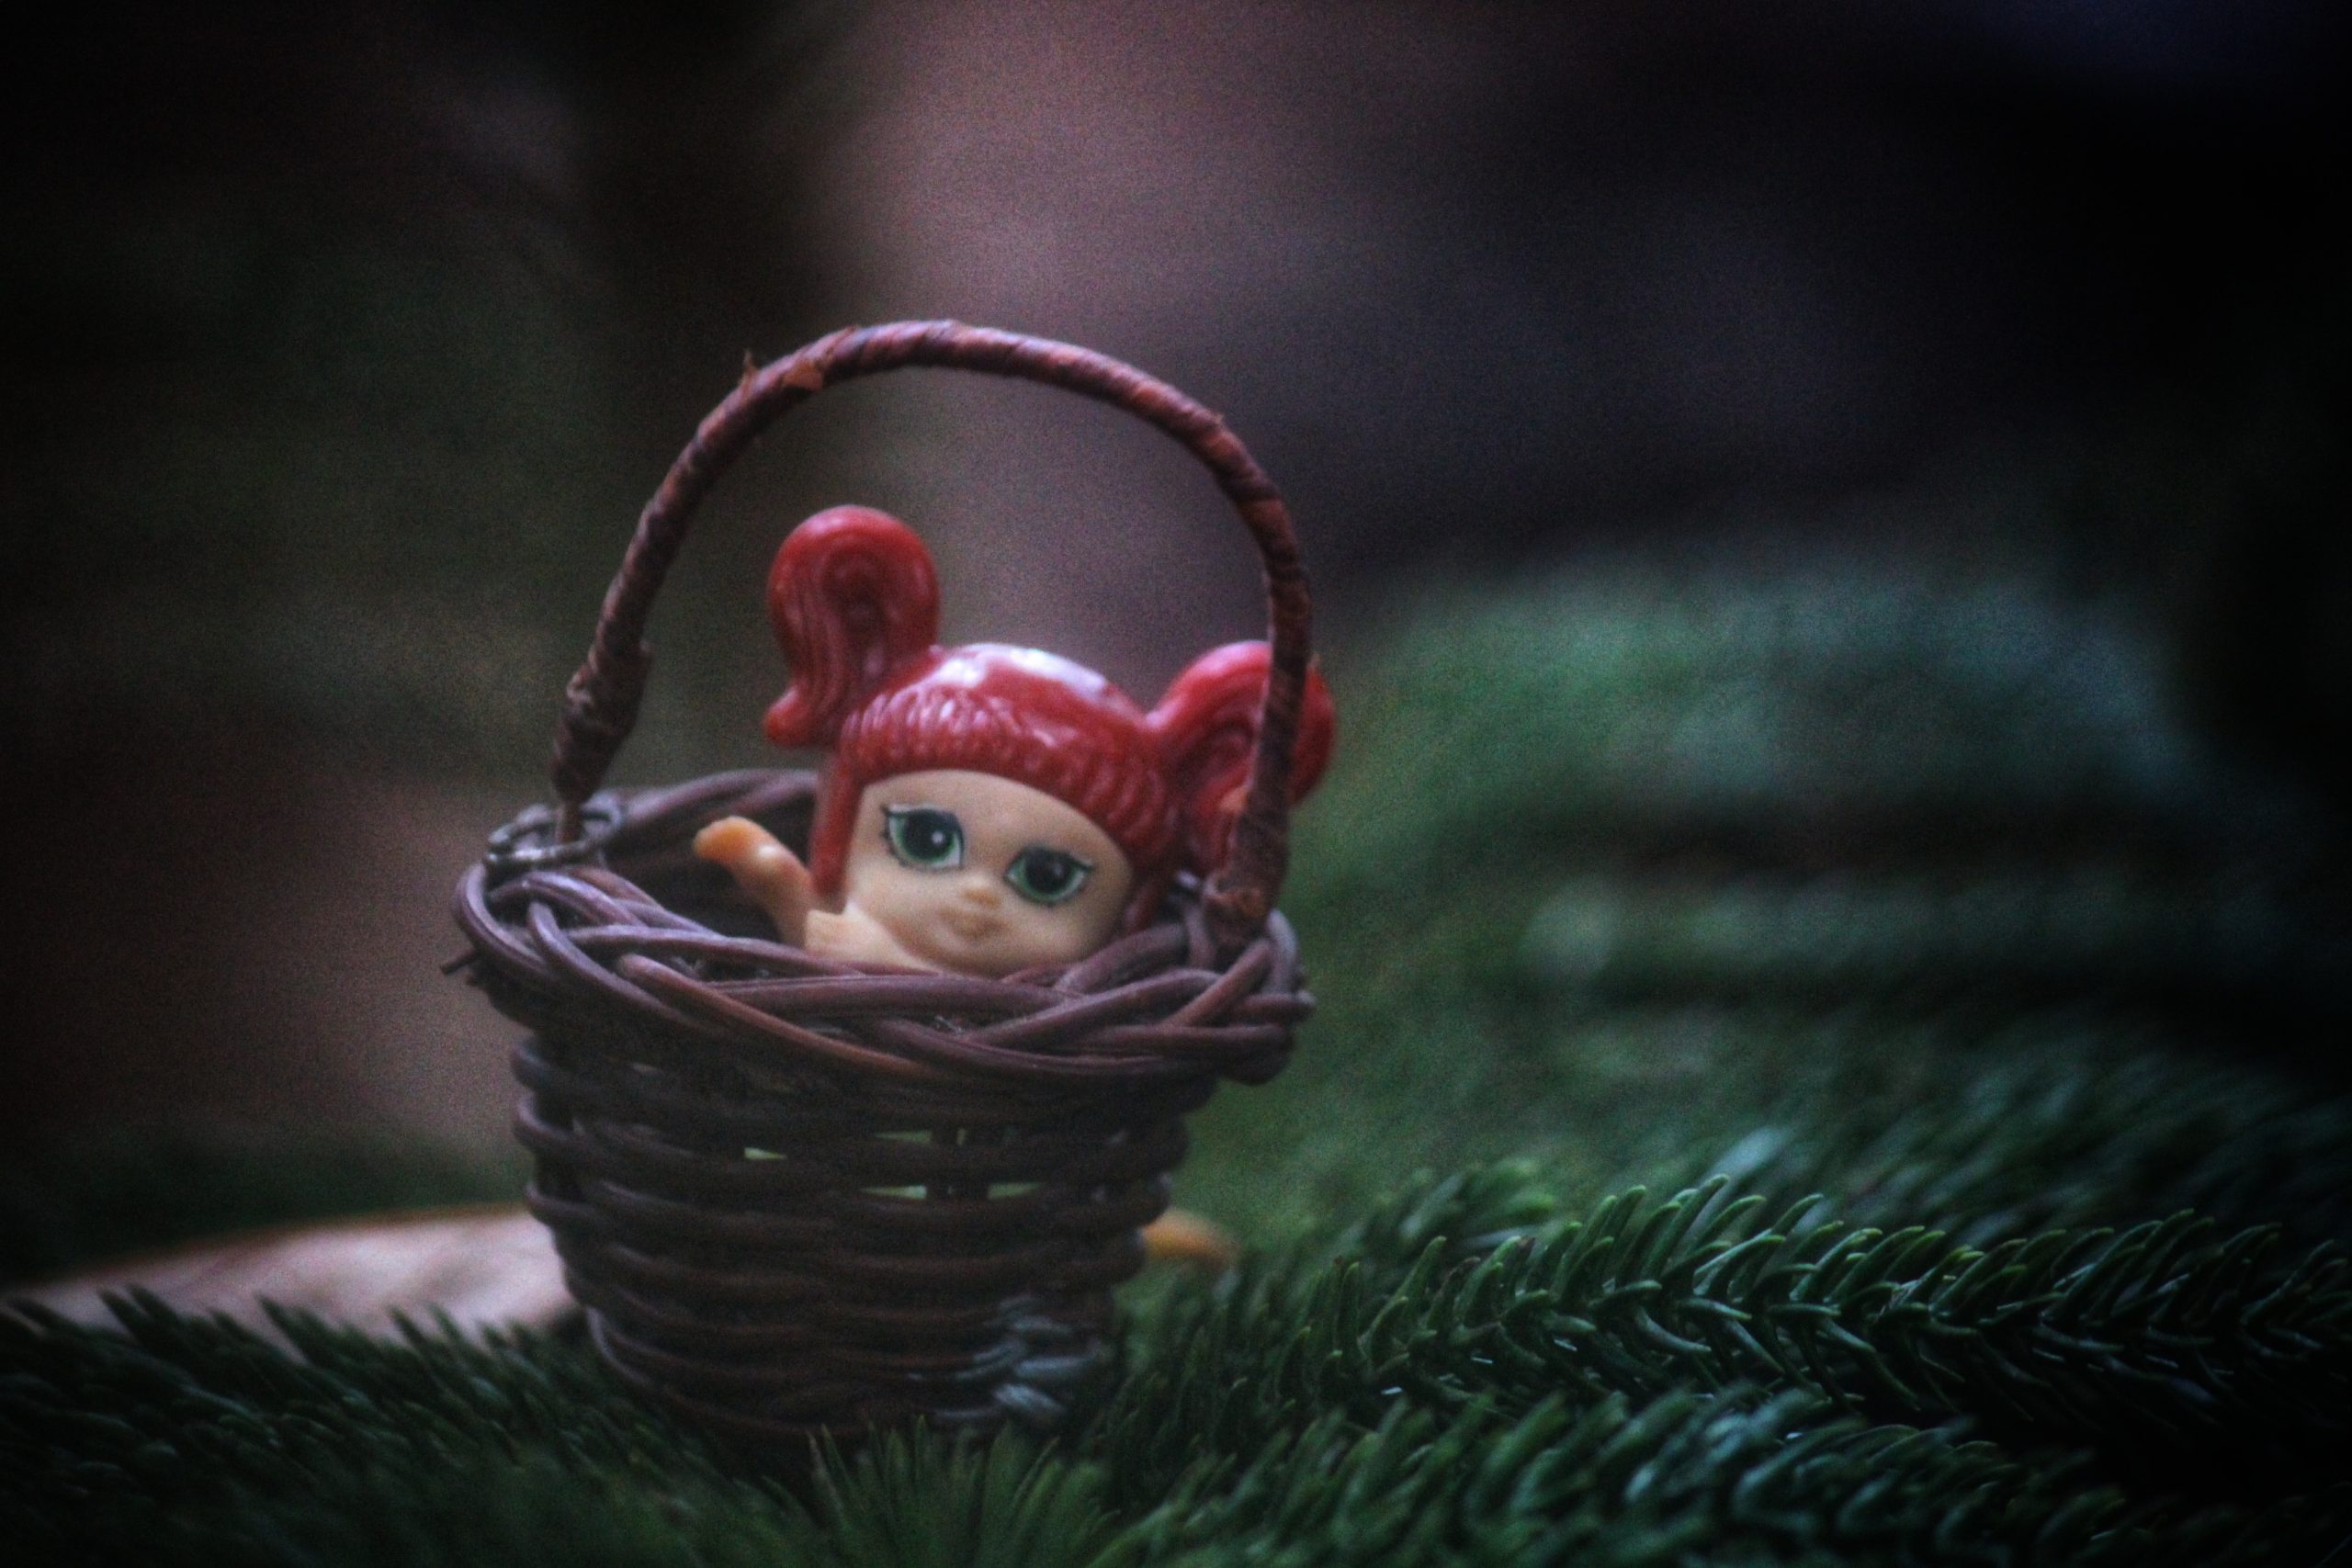 Doll toy in basket